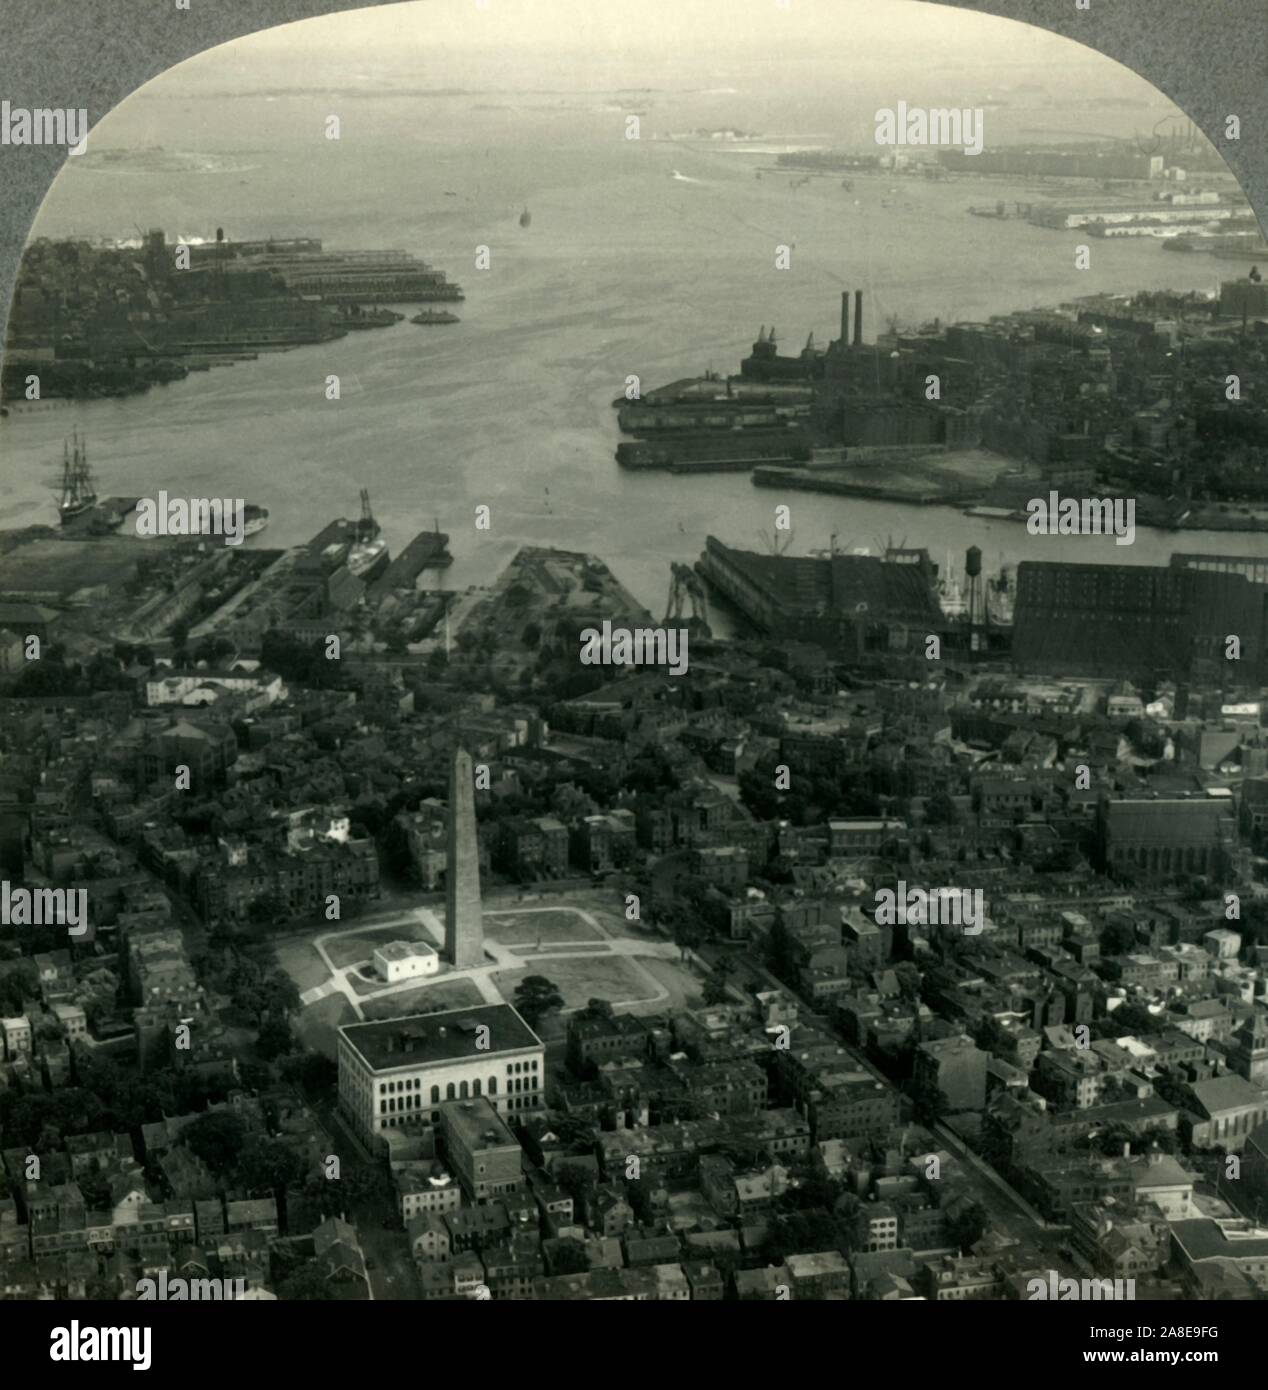 'Bunker Hill Monument and Boston Harbor from the Air, Boston, Mass.', c1930s. Memorial for the Battle of Bunker Hill fought during the American Revolutionary War in Charlestown, laid out in 1629 by engineer Thomas Graves. Boston Hrbour is a a major shipping port in the northeastern United States. From &quot;Tour of the World&quot;. [Keystone View Company, Meadville, Pa., New York, Chicago, London] Stock Photo